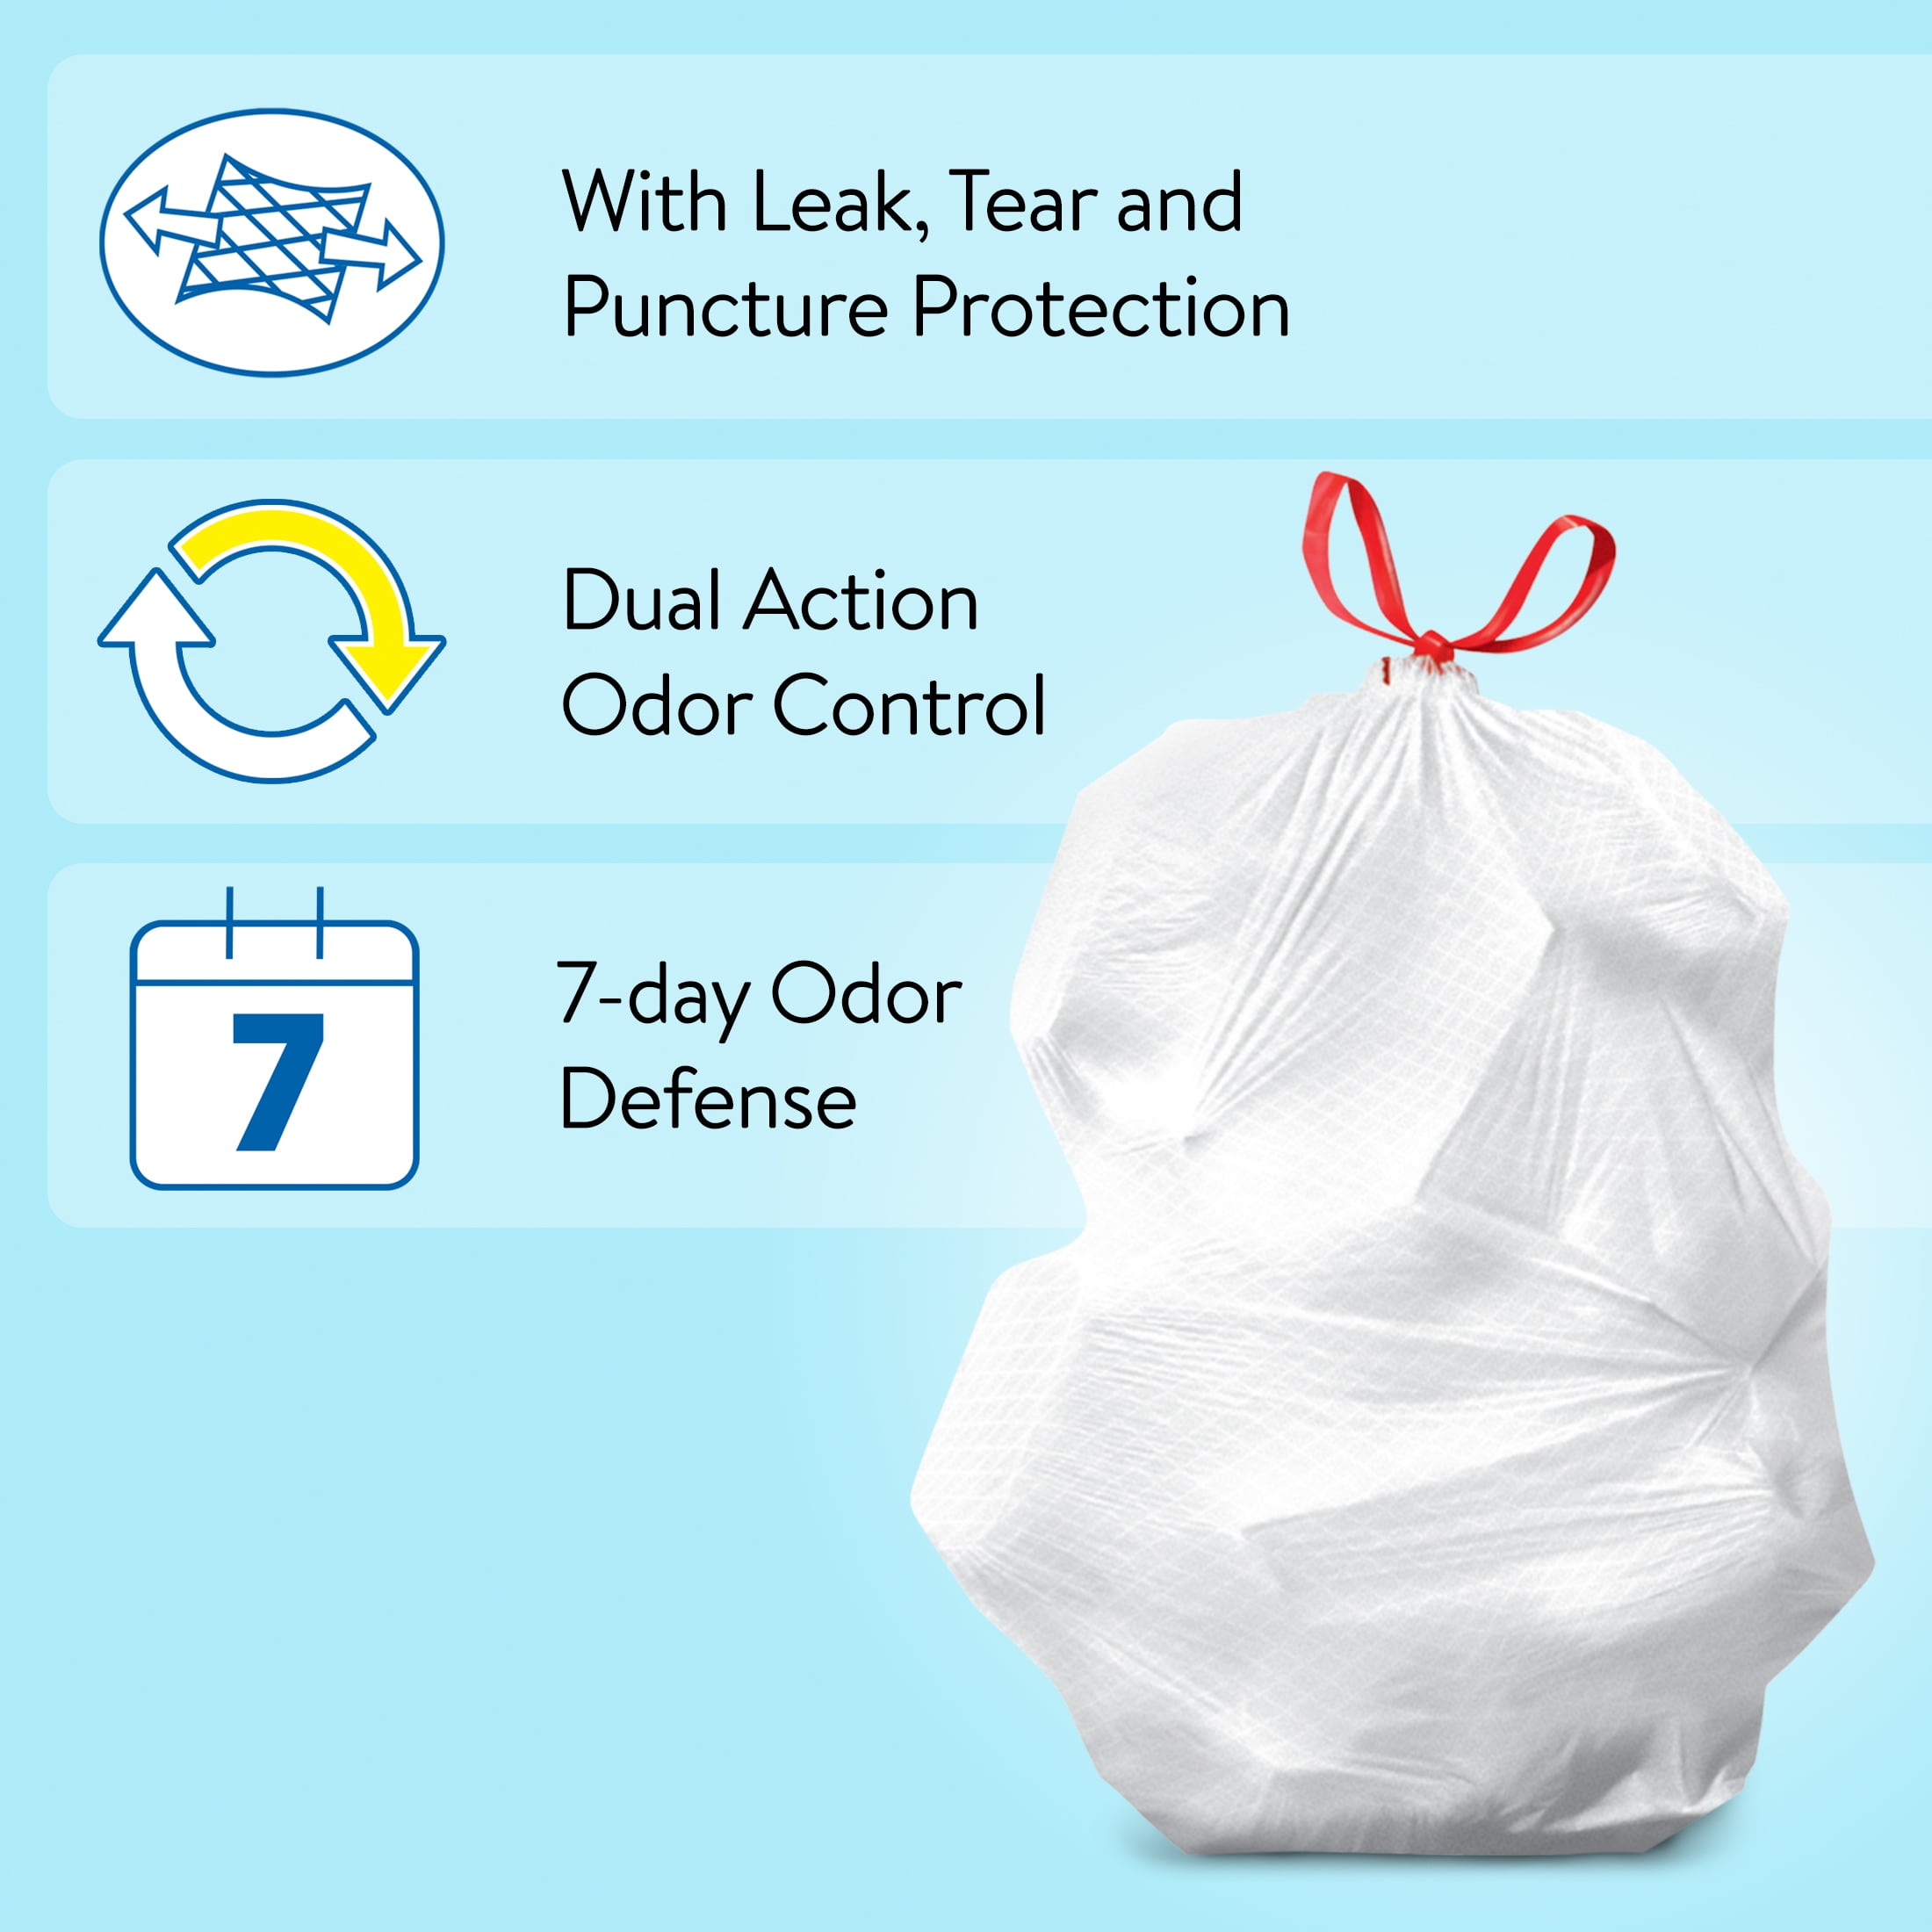 Great Value Strong Flex 13-Gallon Drawstring Tall Kitchen Trash Bags, Fresh  Scent, 120 Bags